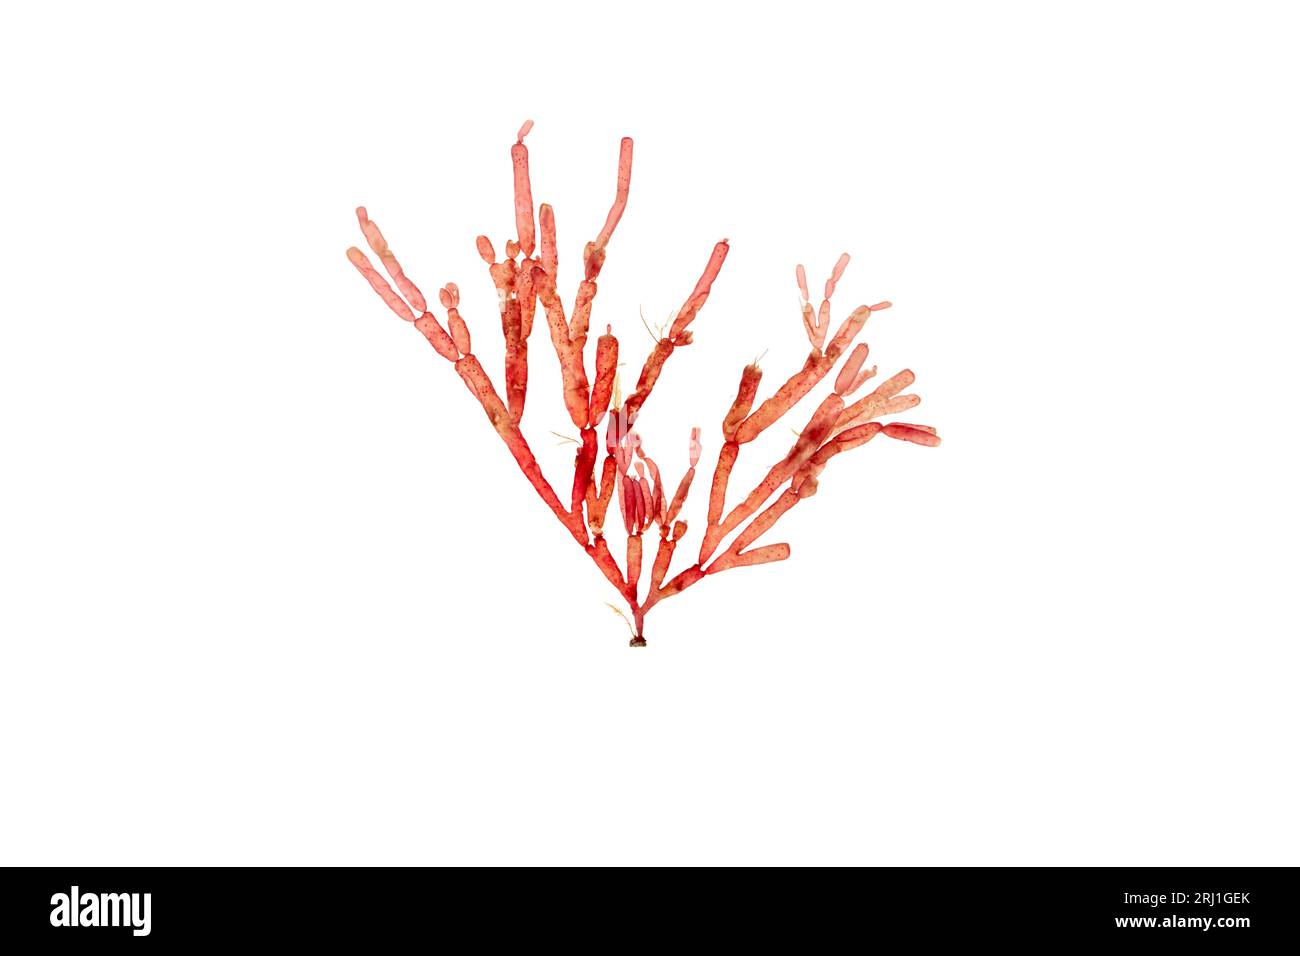 Lomentaria articulata red algae branch isolated on white. Rhodophyta seaweed with jointed cylindrical frond. Stock Photo